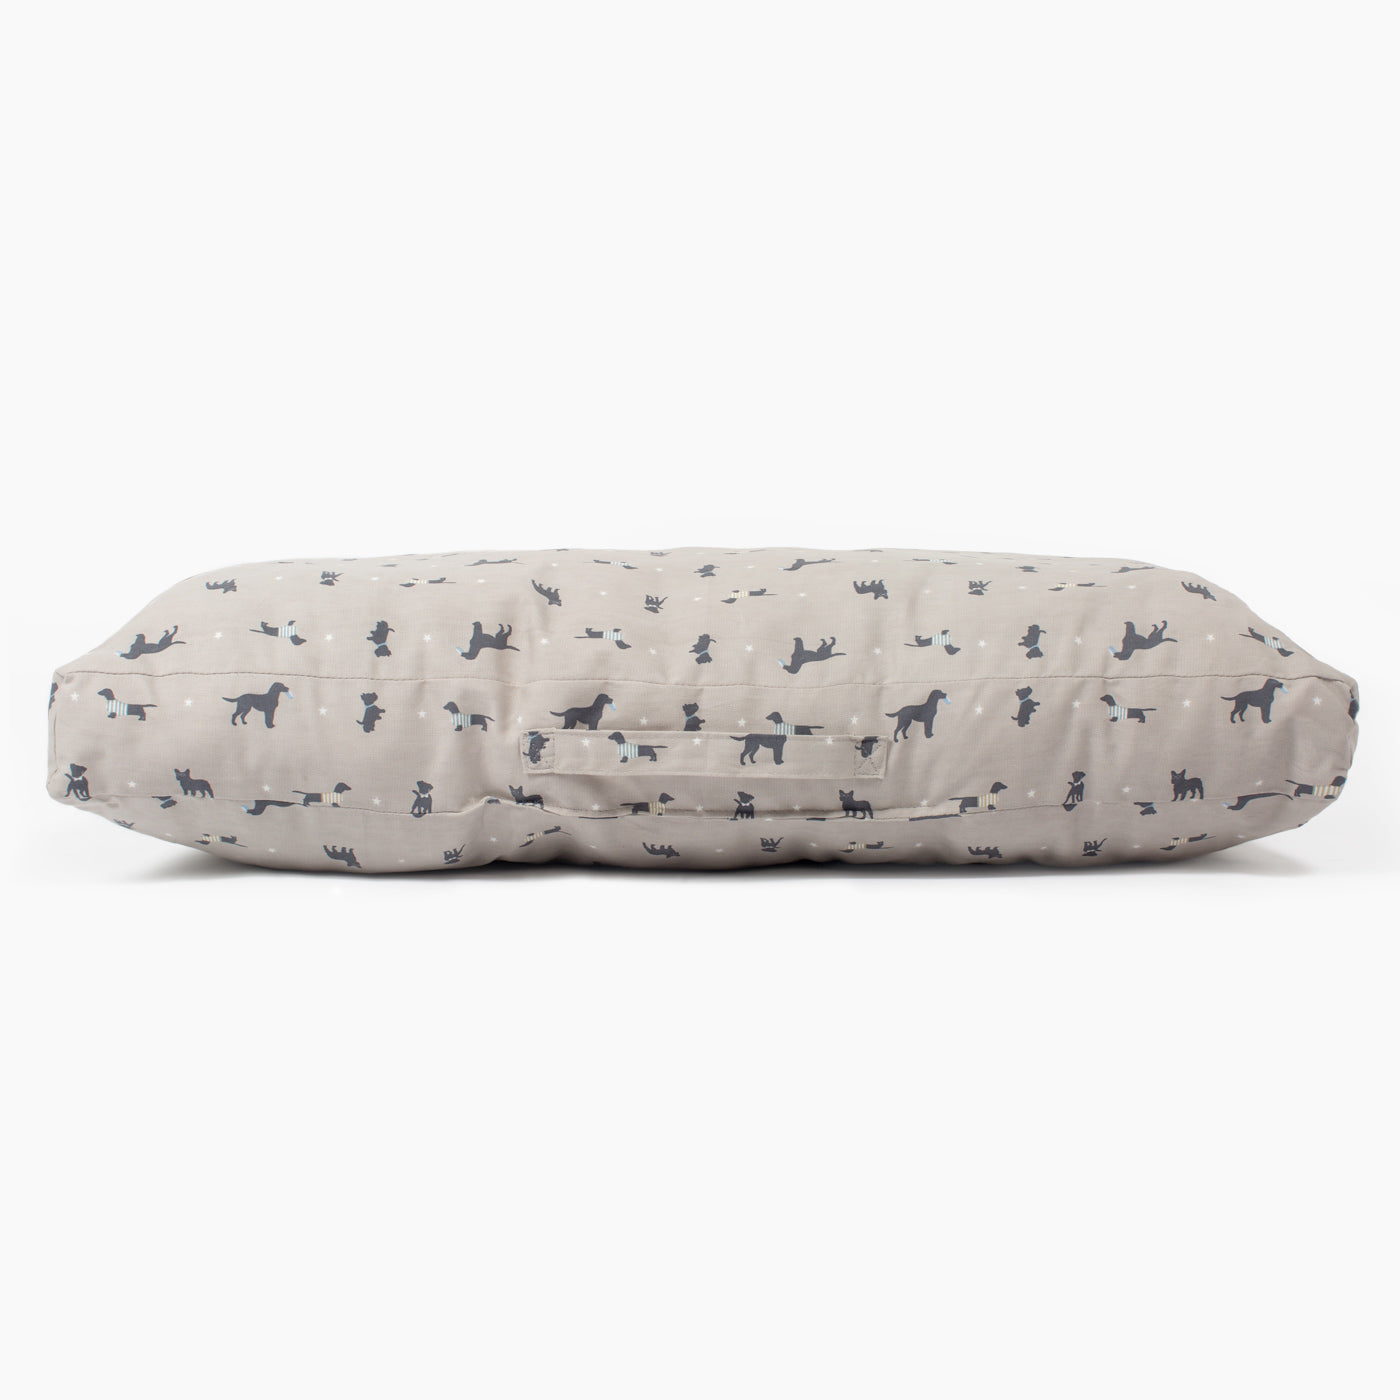 Luxury Sleepeeze Dog Cushion in Cosmopolitan Dog, The Perfect Pet Bed Time Accessory! Available Now at Lords & Labradors